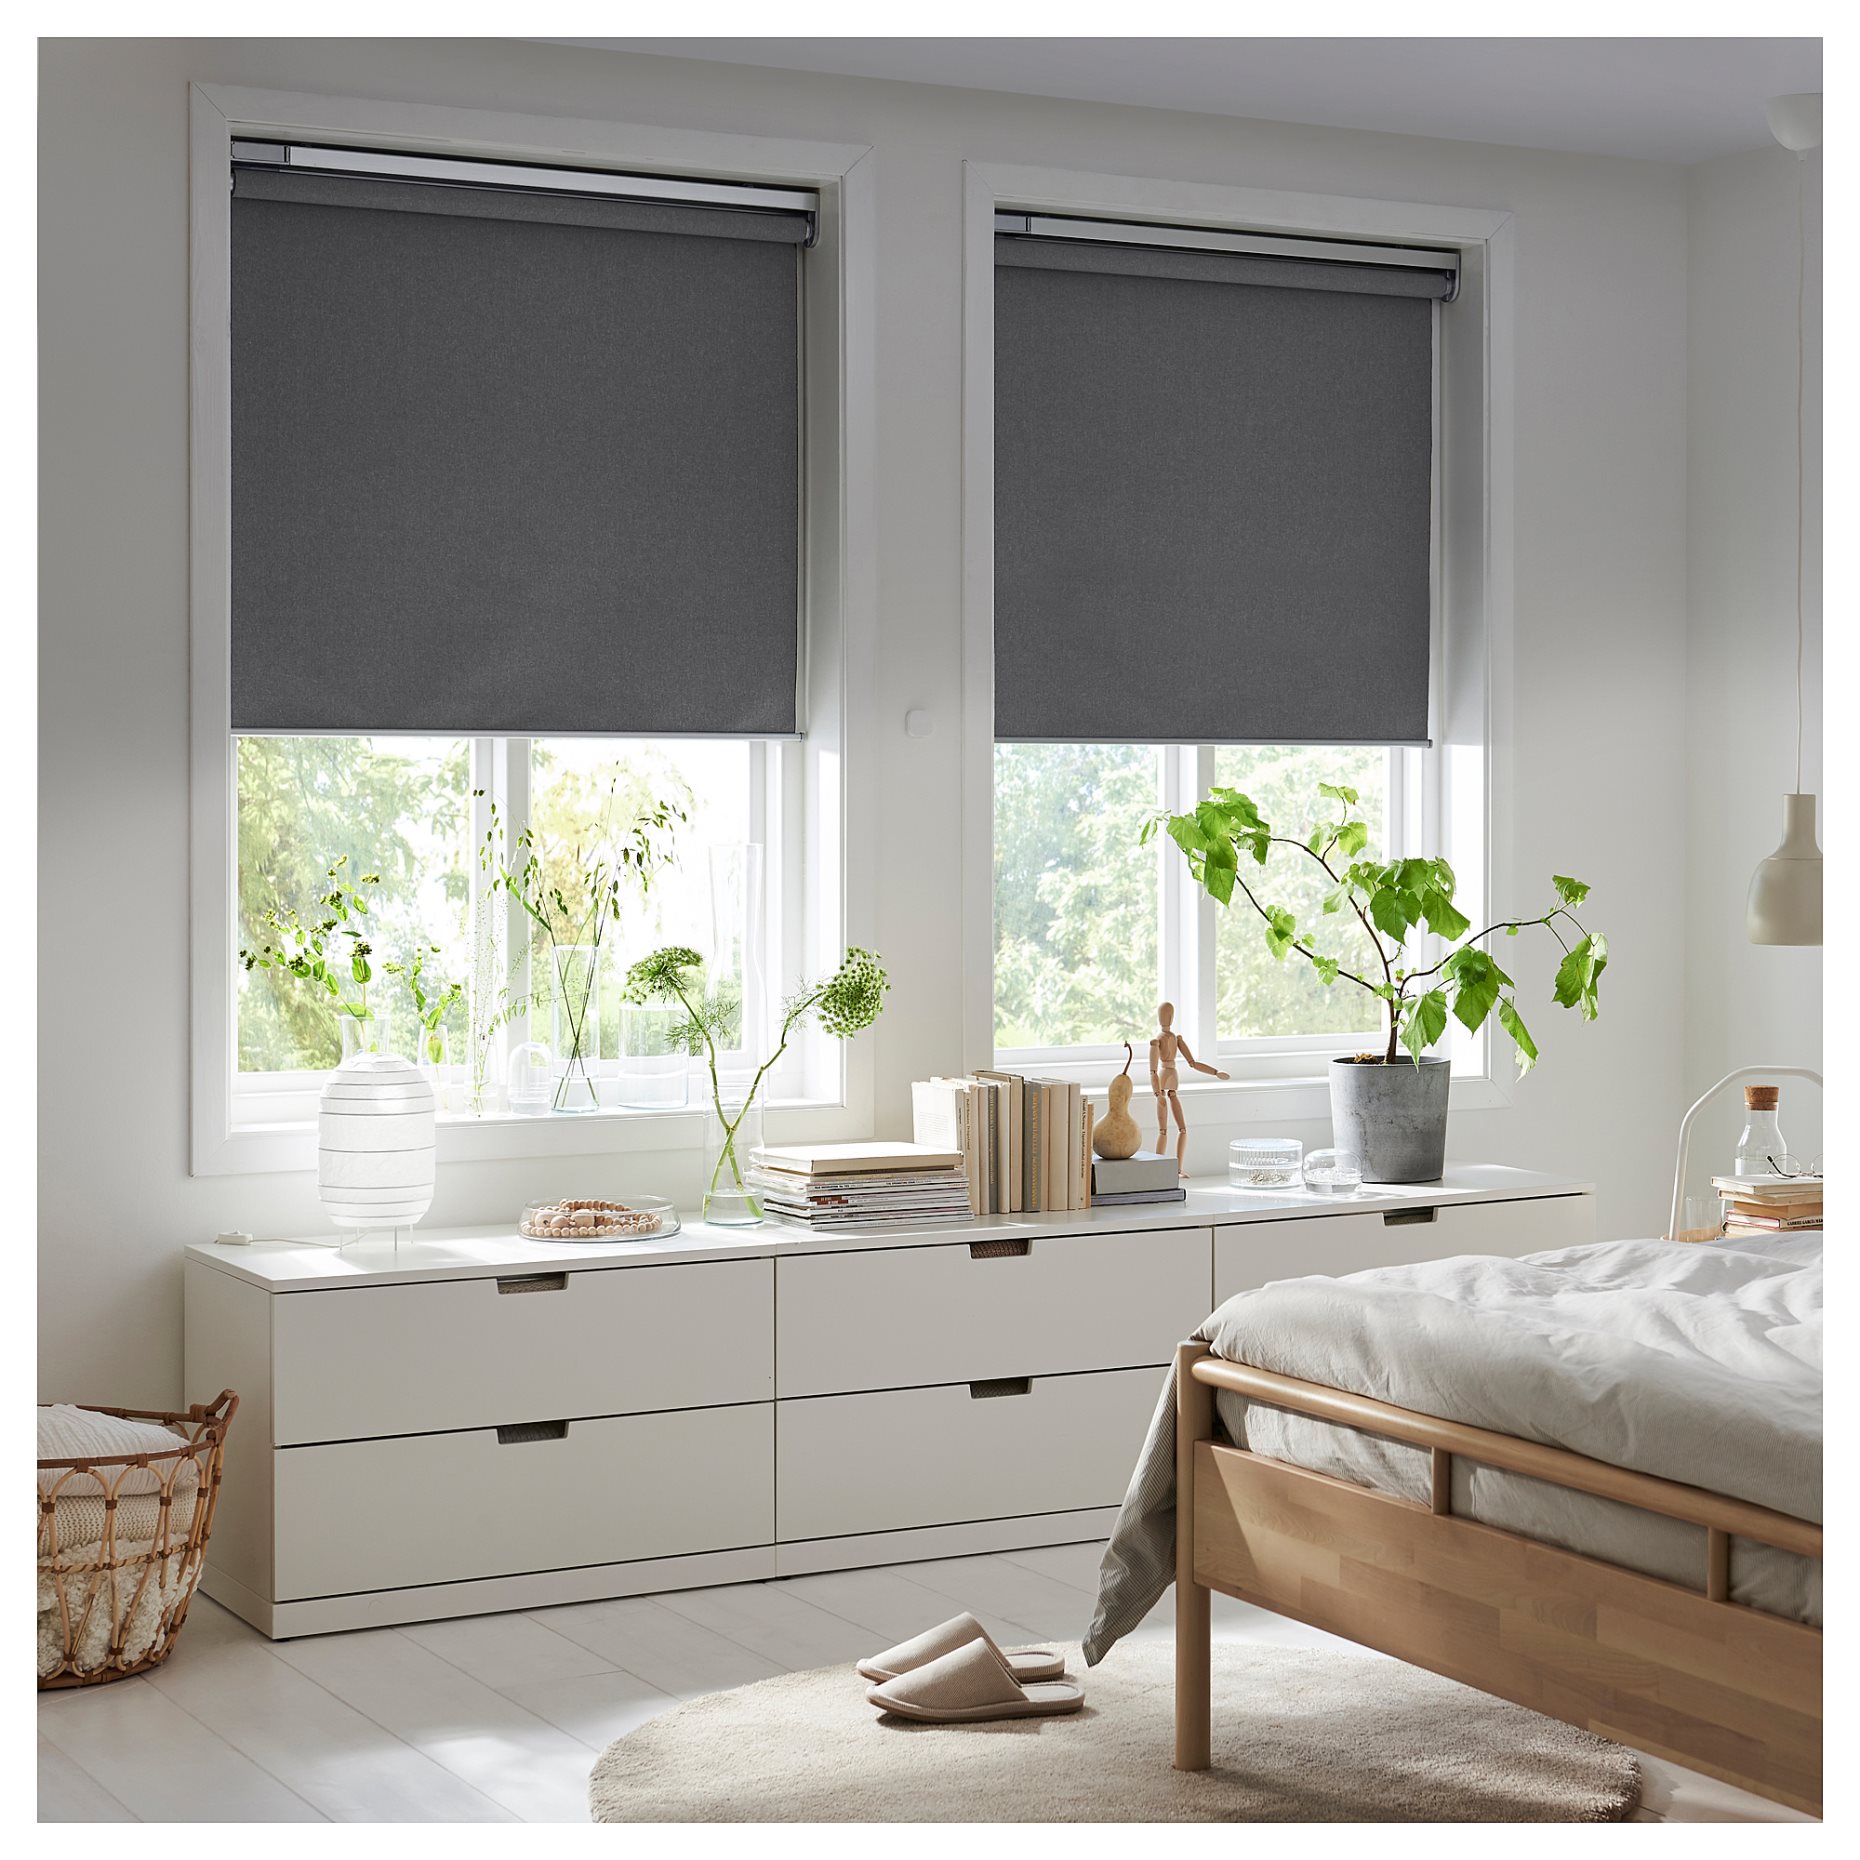 FYRTUR, block-out roller blind wireless/battery-operated, 304.081.73